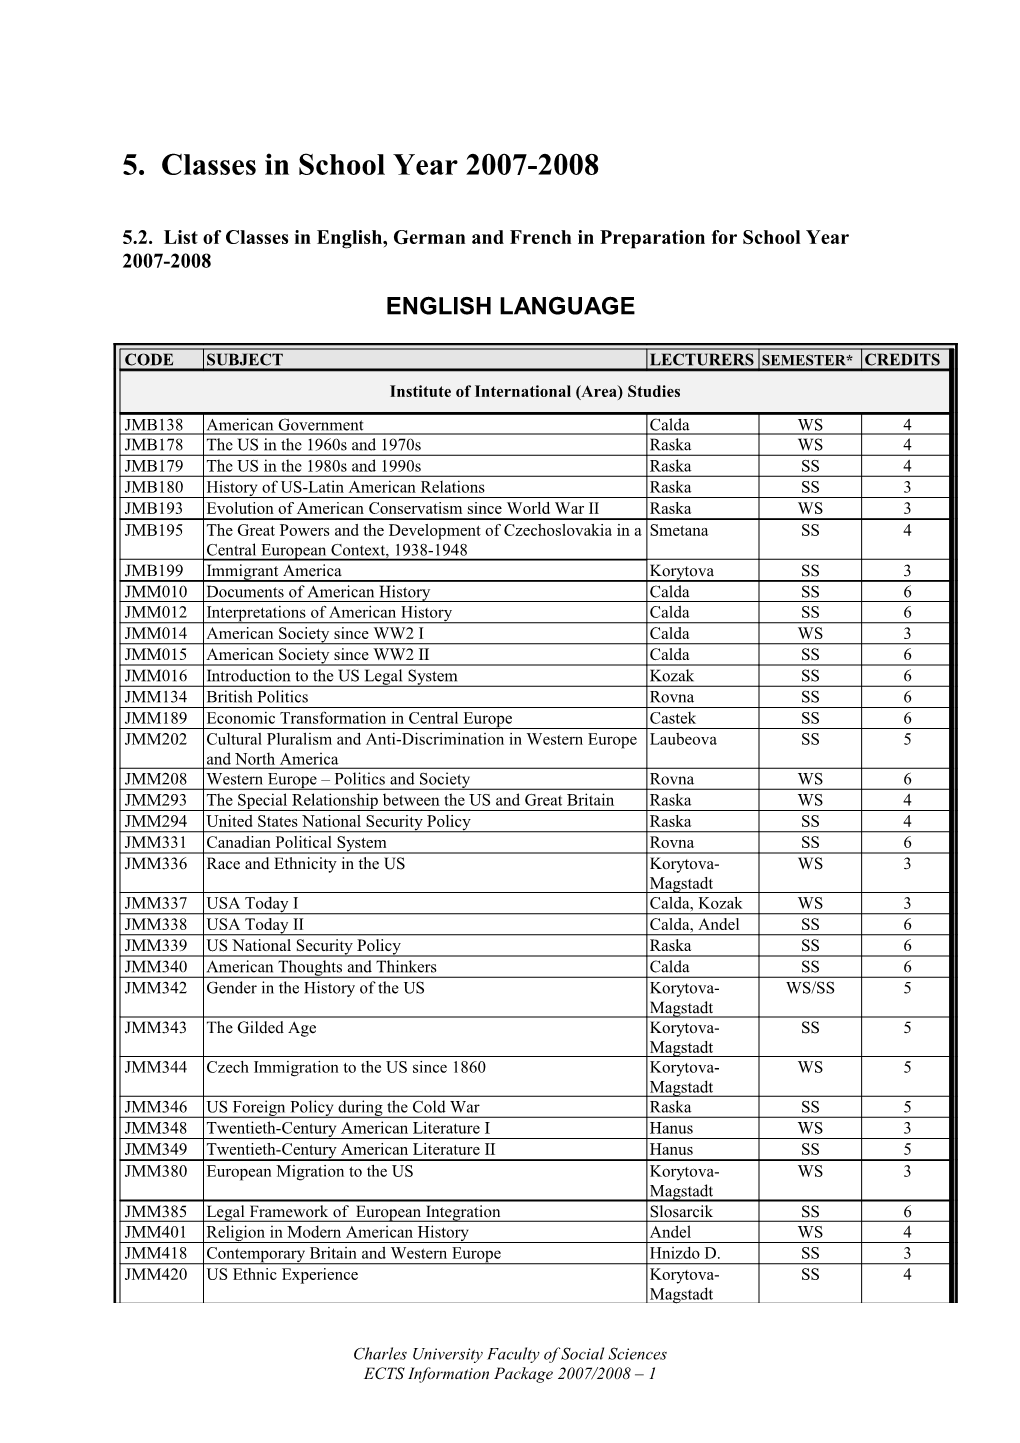 5.2. List of Classes in English, German and French in Preparation for School Year